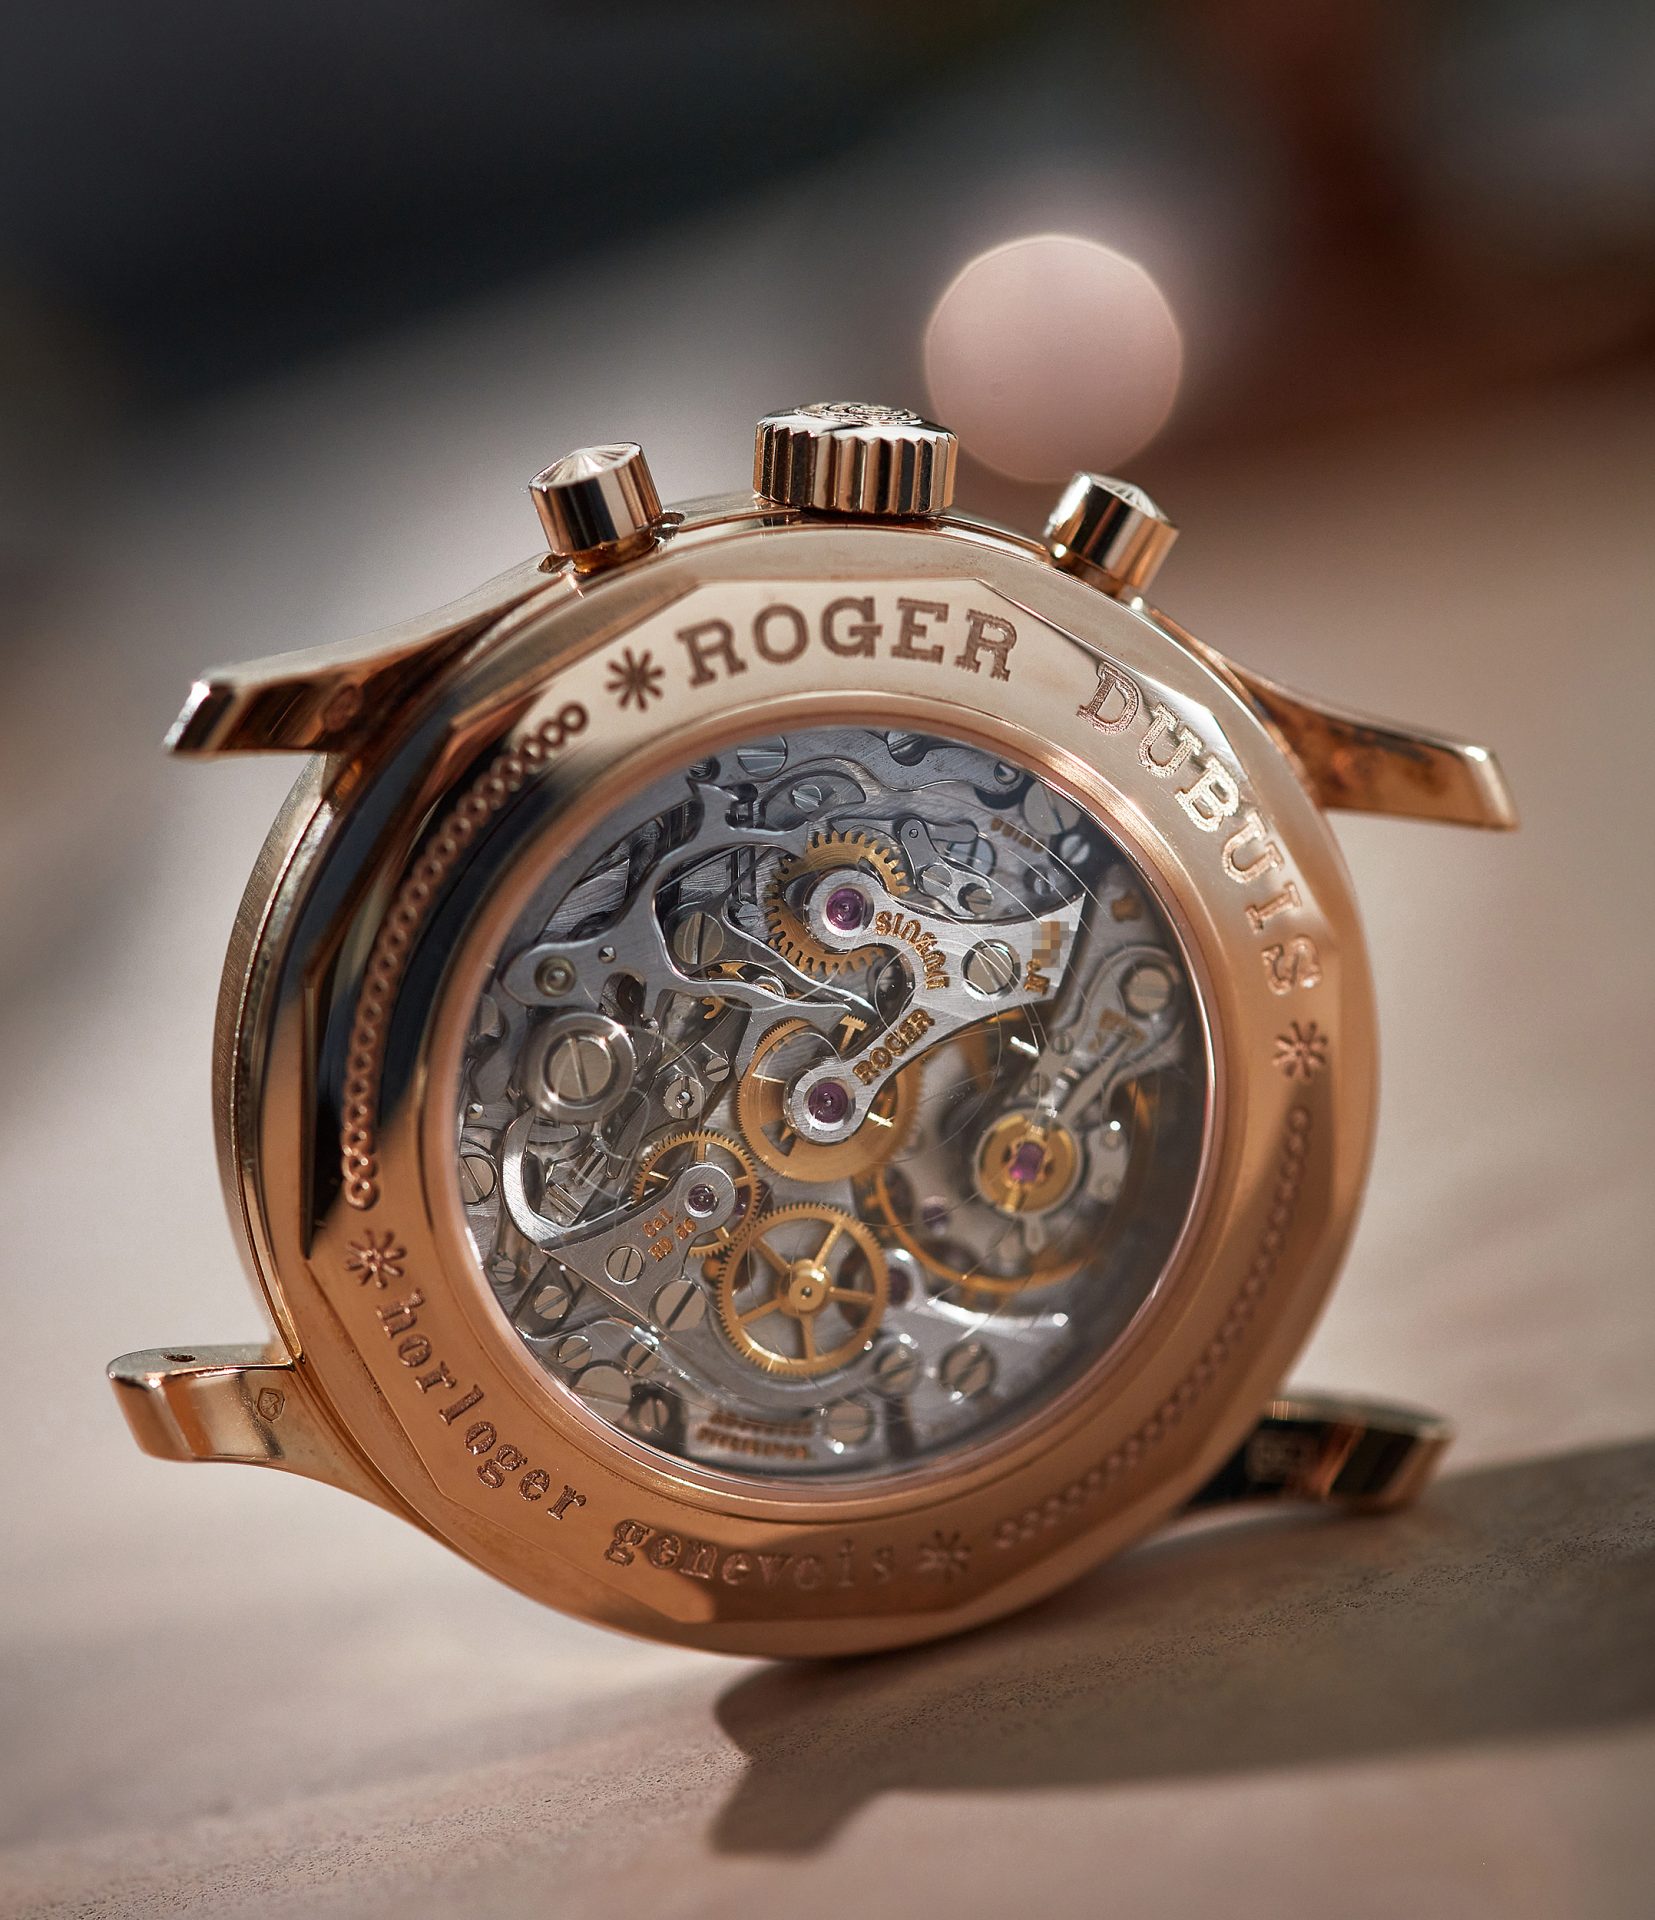 Roger dubuis hommage chronograph h40 blue dial rose gold a collected man london 4. Jpg